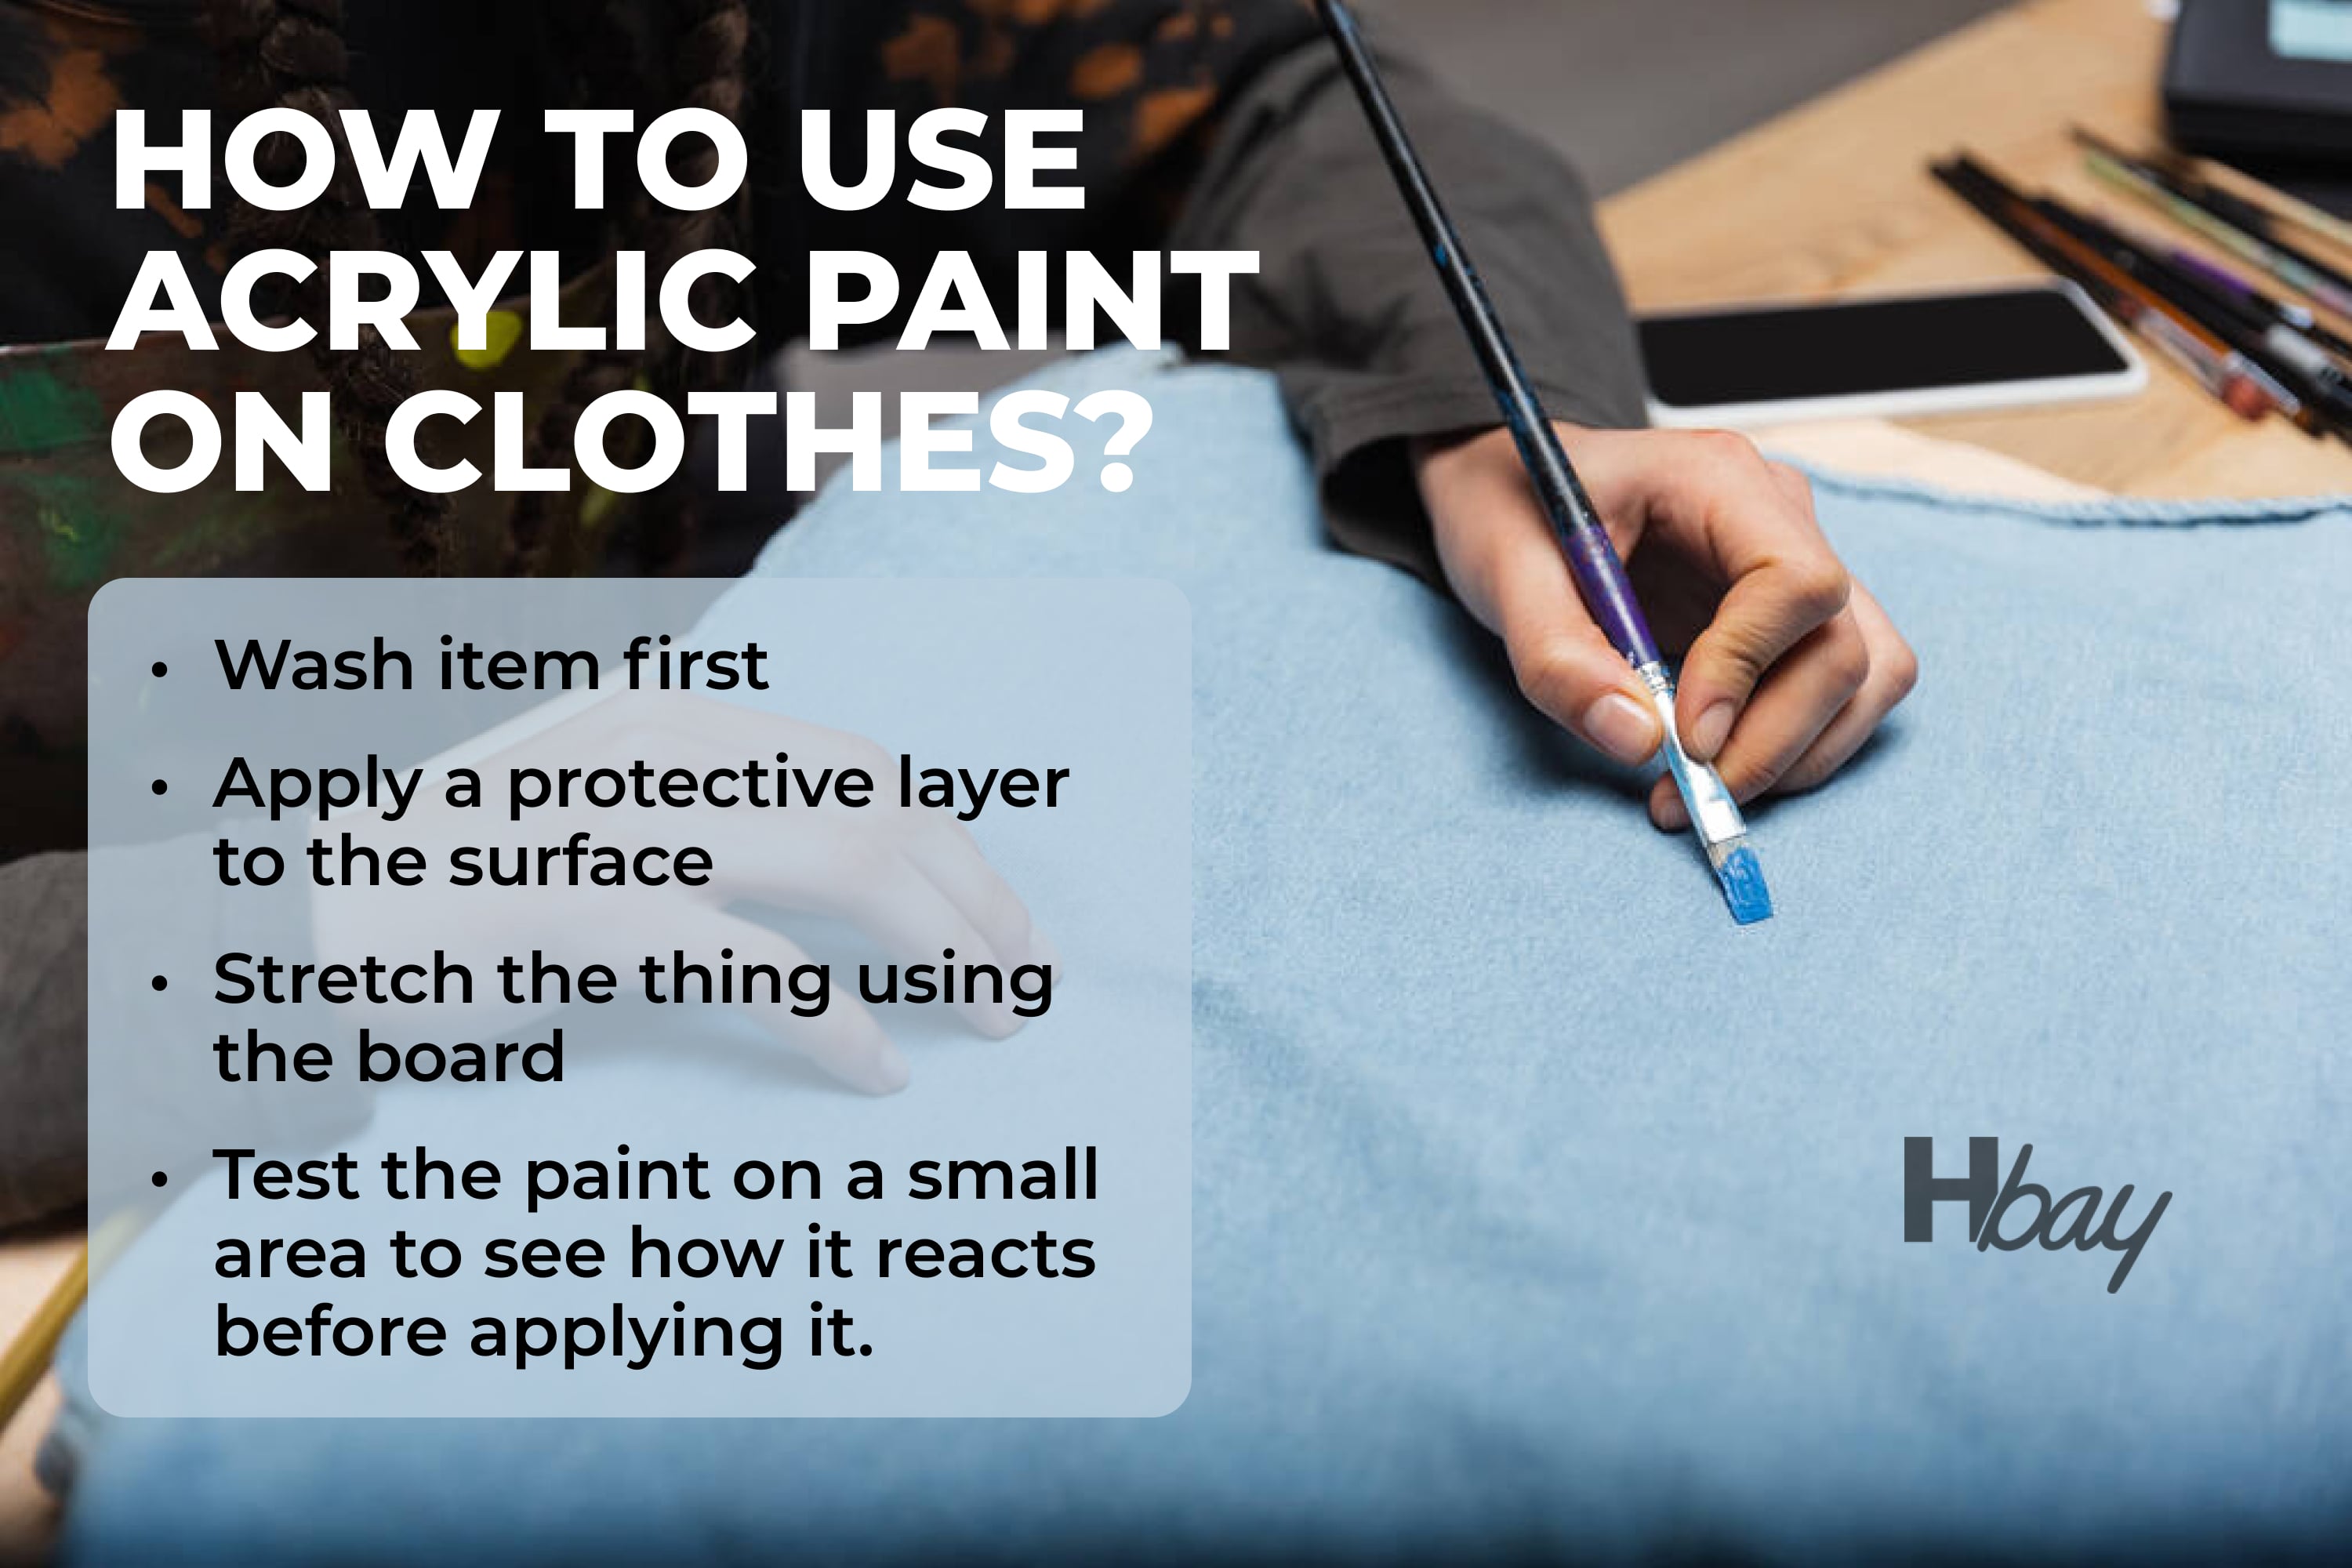 How to use acrylic paint on clothes